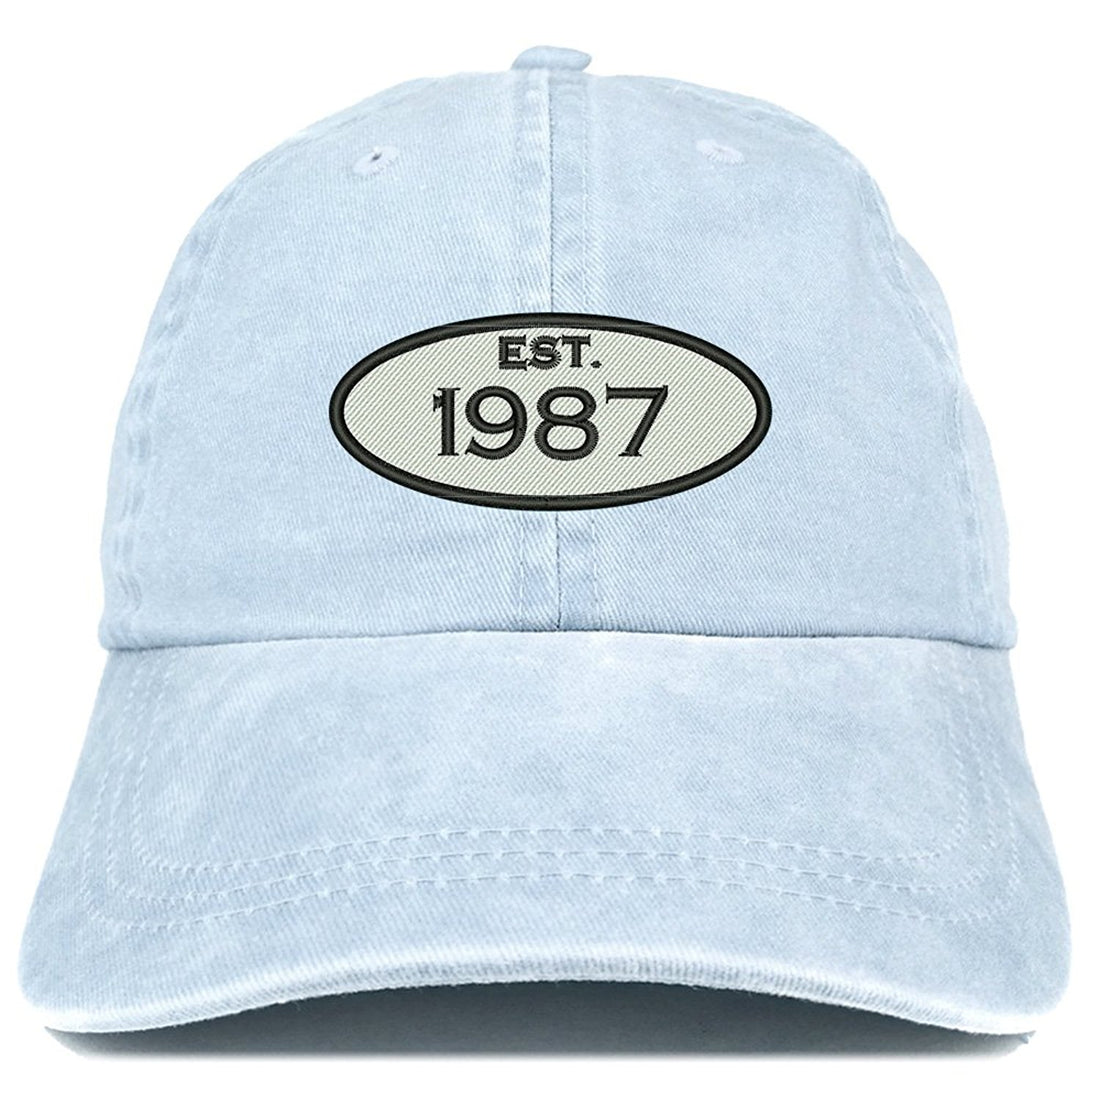 Trendy Apparel Shop Established 1987 Embroidered 32nd Birthday Gift Pigment Dyed Washed Cotton Cap